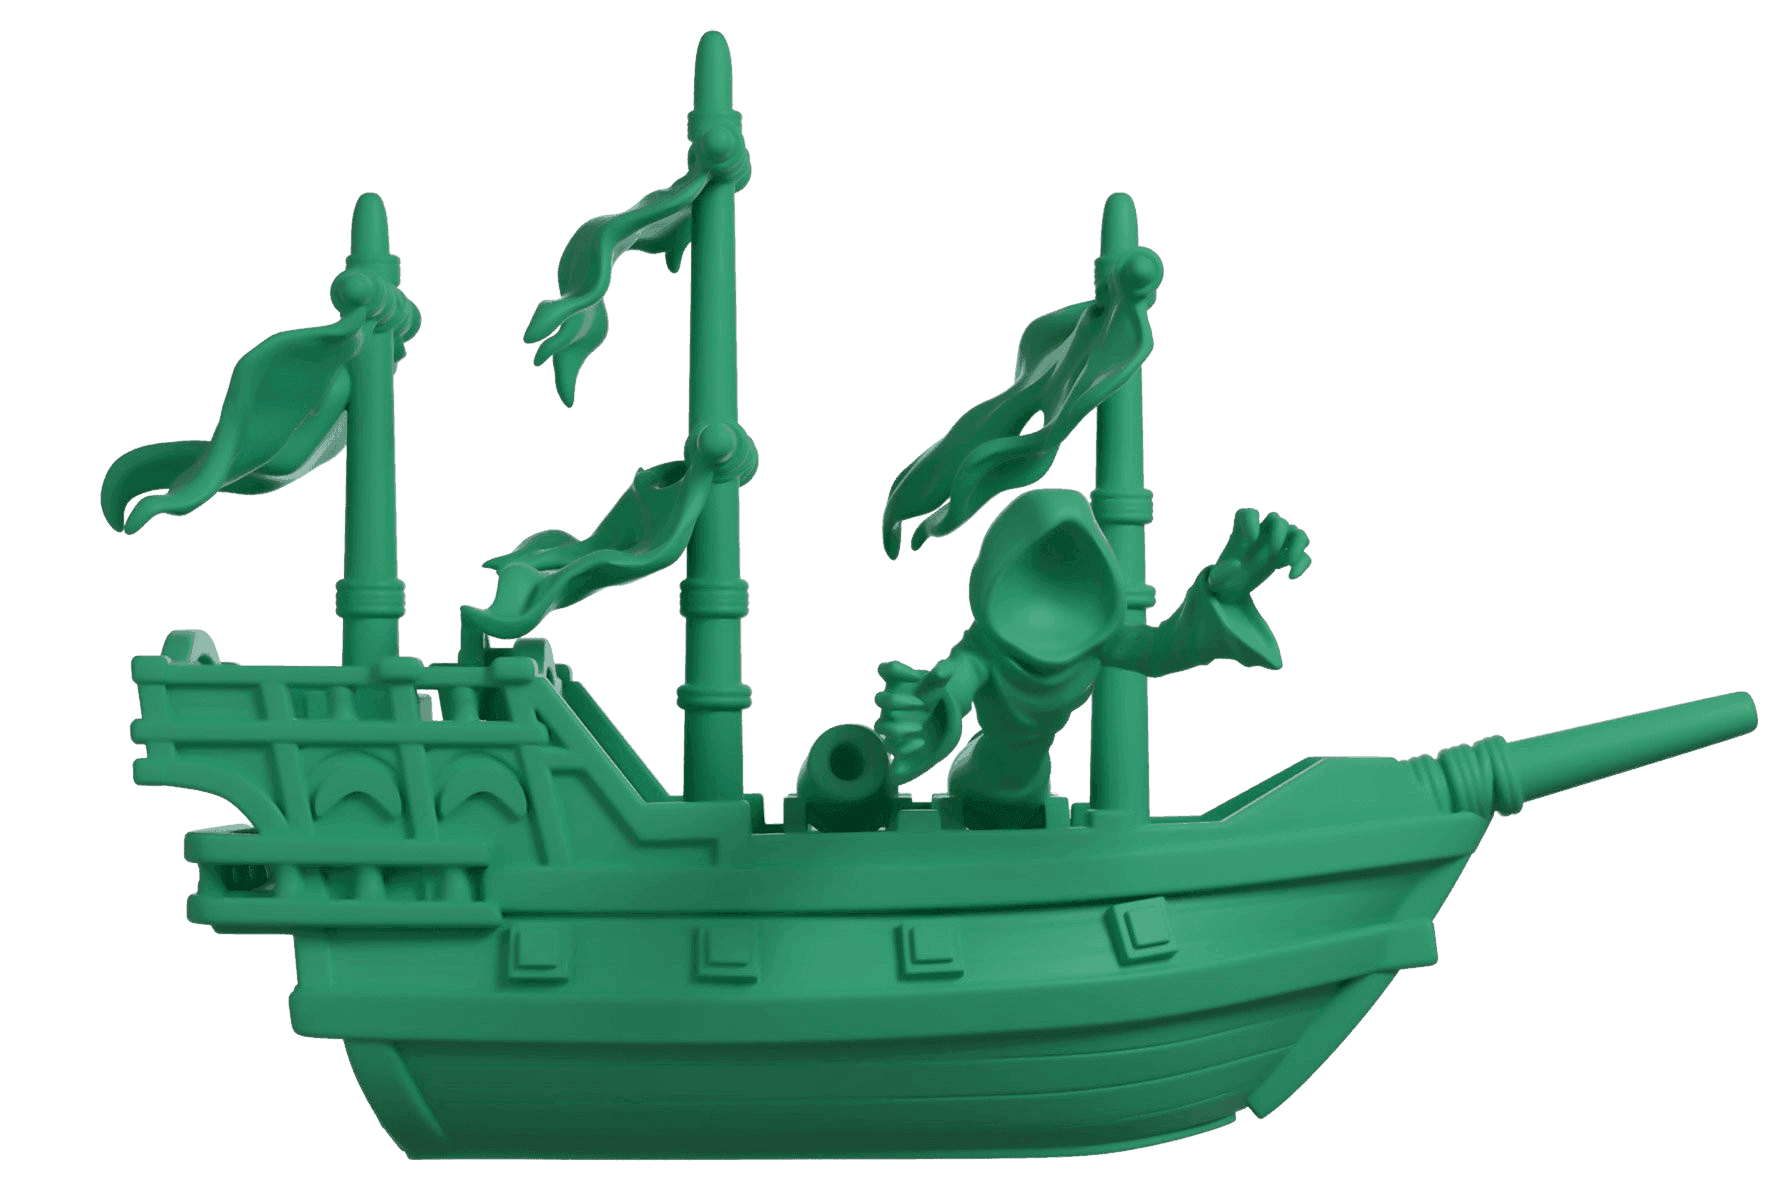 Youtooz - Sea of Thieves - Ghost Ship Vinyl Figure #7 - The Card Vault